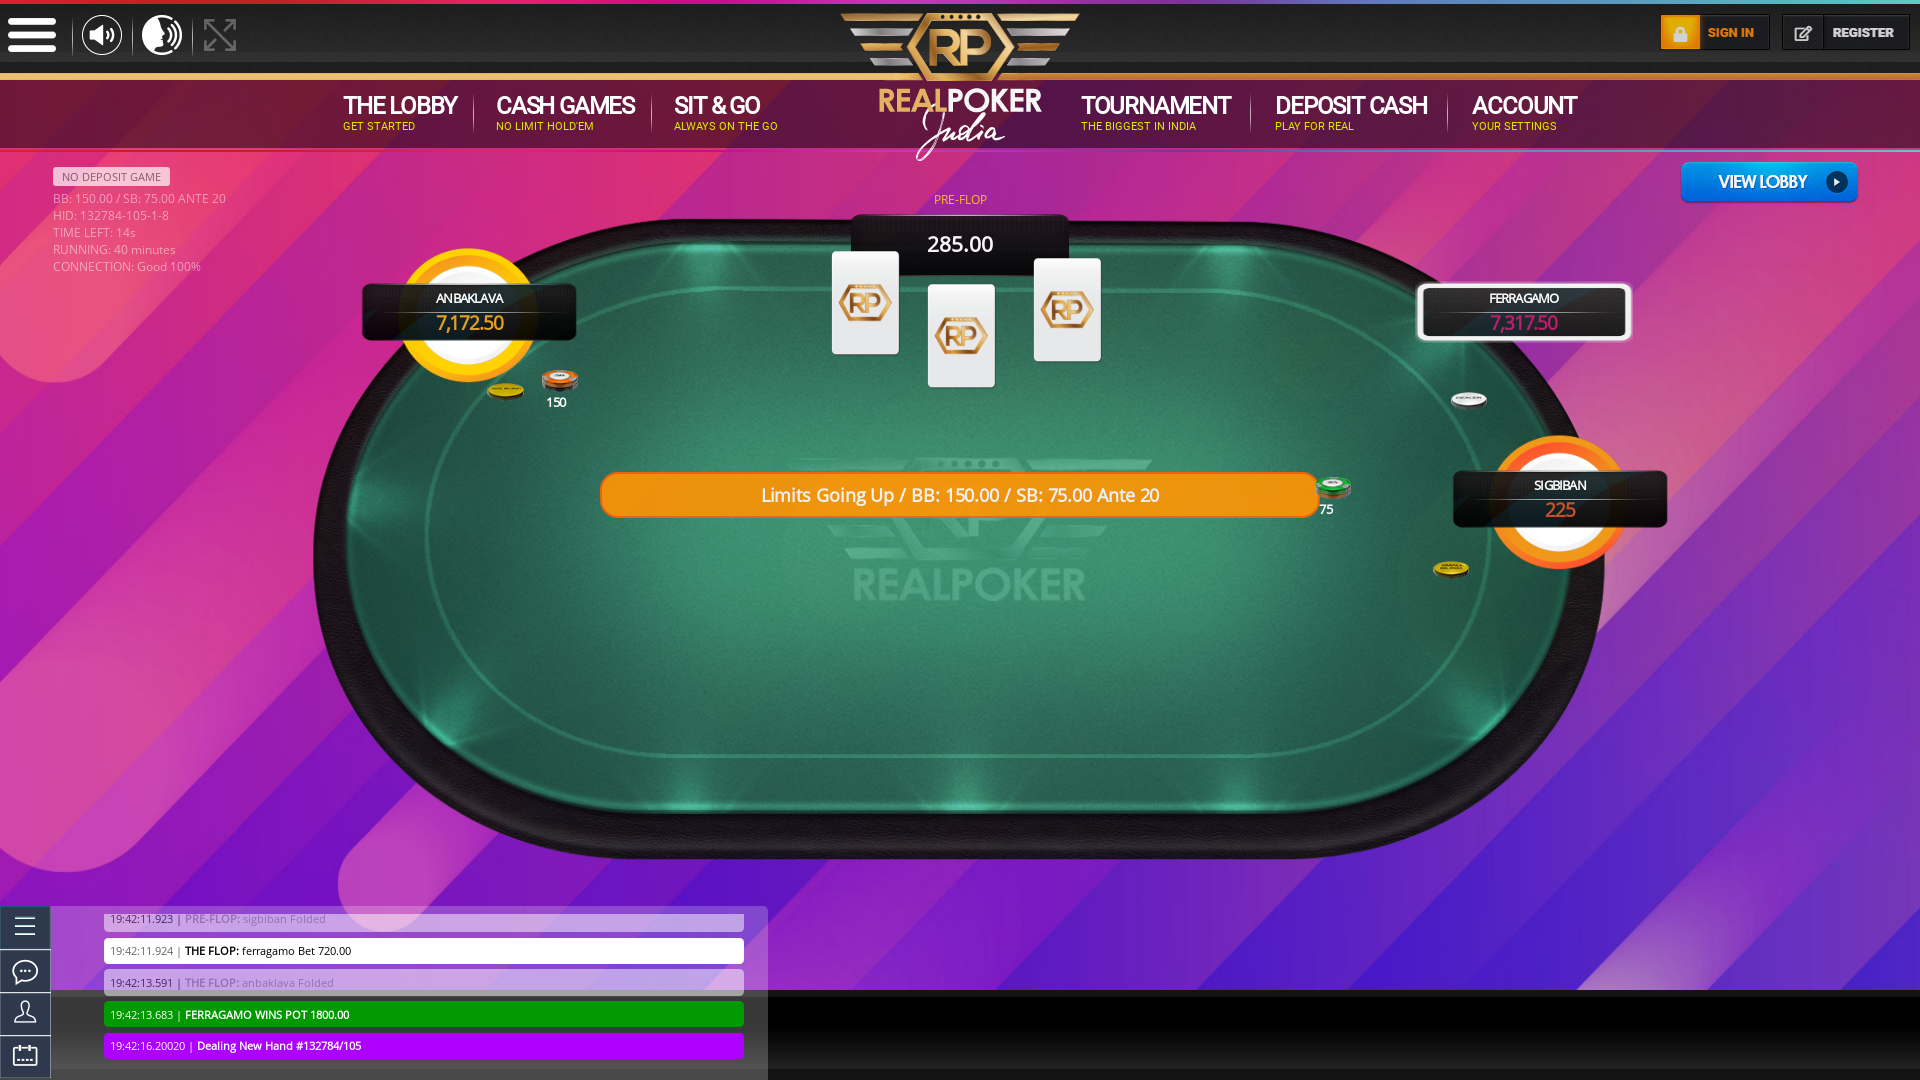 Indian poker on a 10 player table in the 39th minute